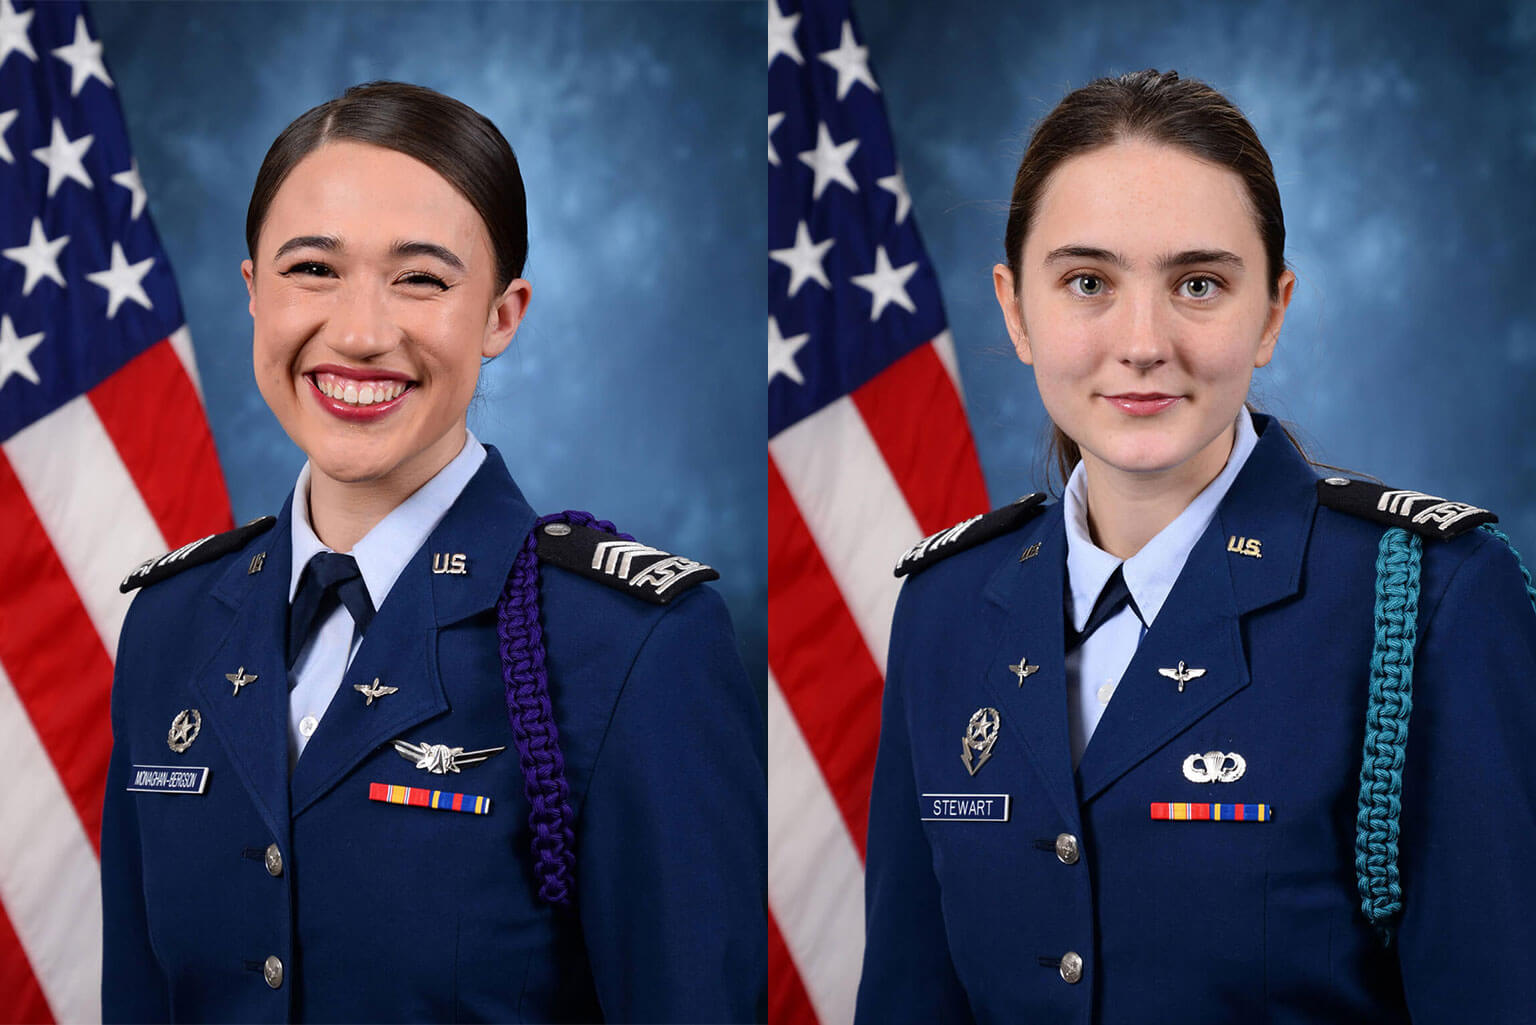 Cadets 2nd Class Kelsey Monaghan-Bergson and Cadet 2nd Class Sophia Stewart, juniors at the U.S. Air Force Academy.